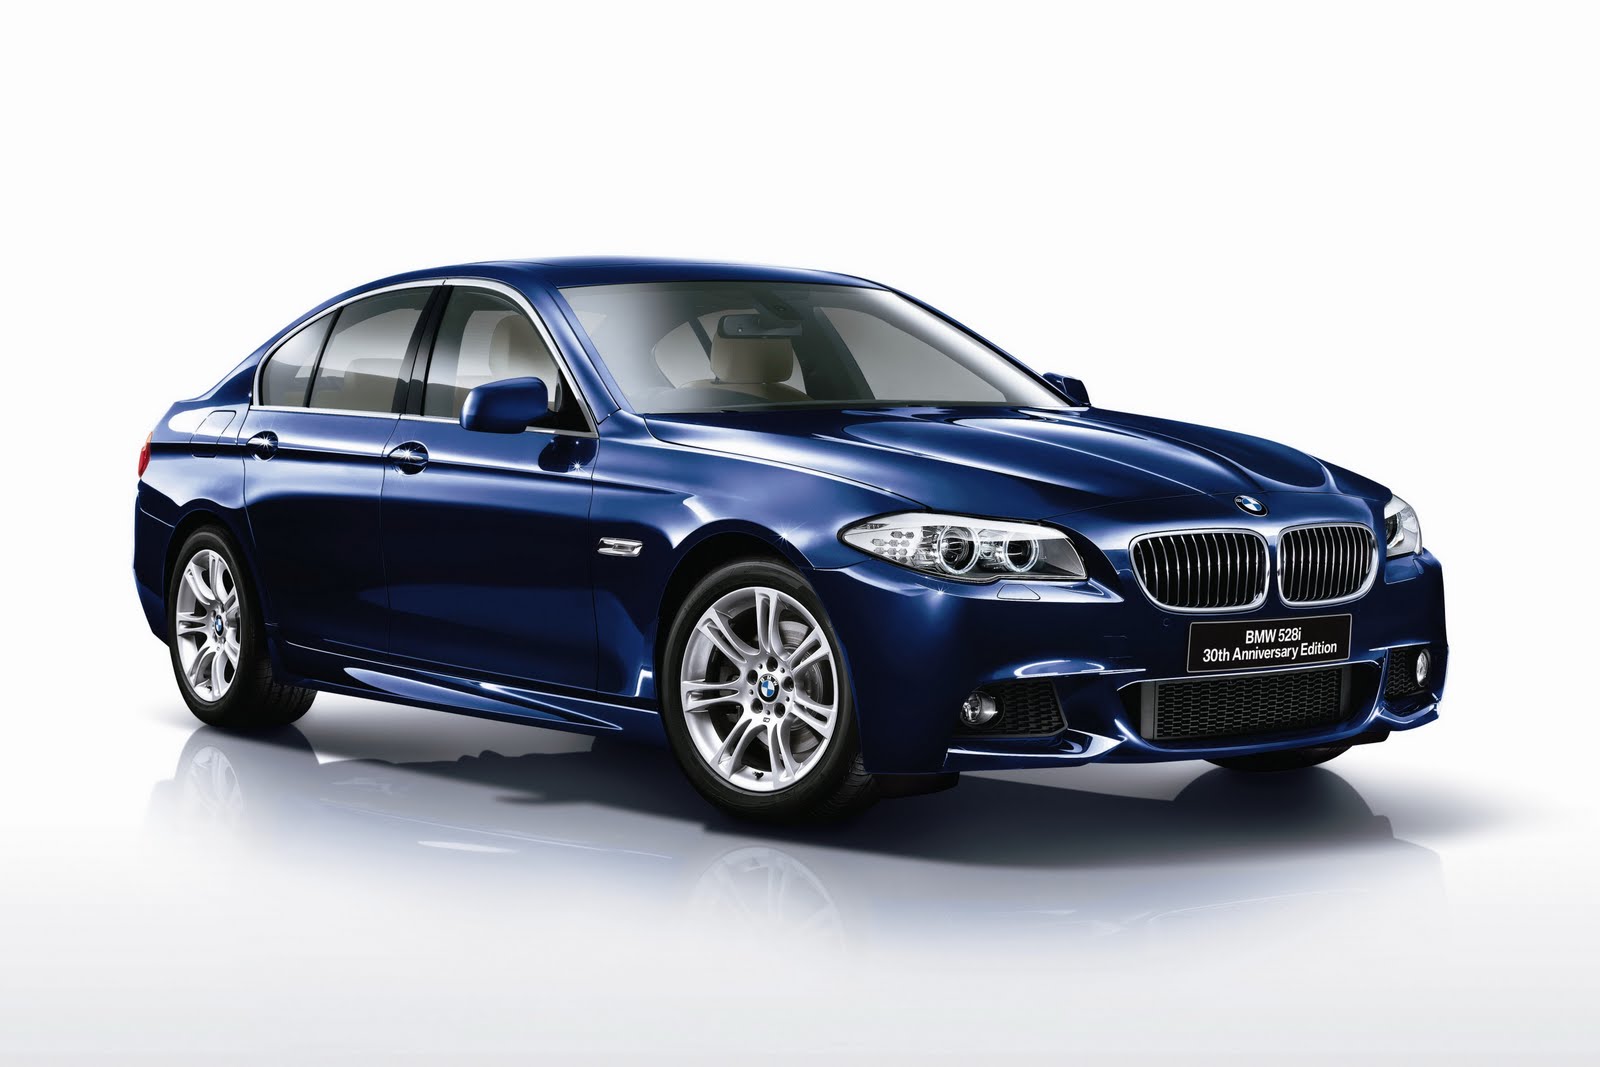 "BMW 528i 30th Anniversary Edition" for Japan